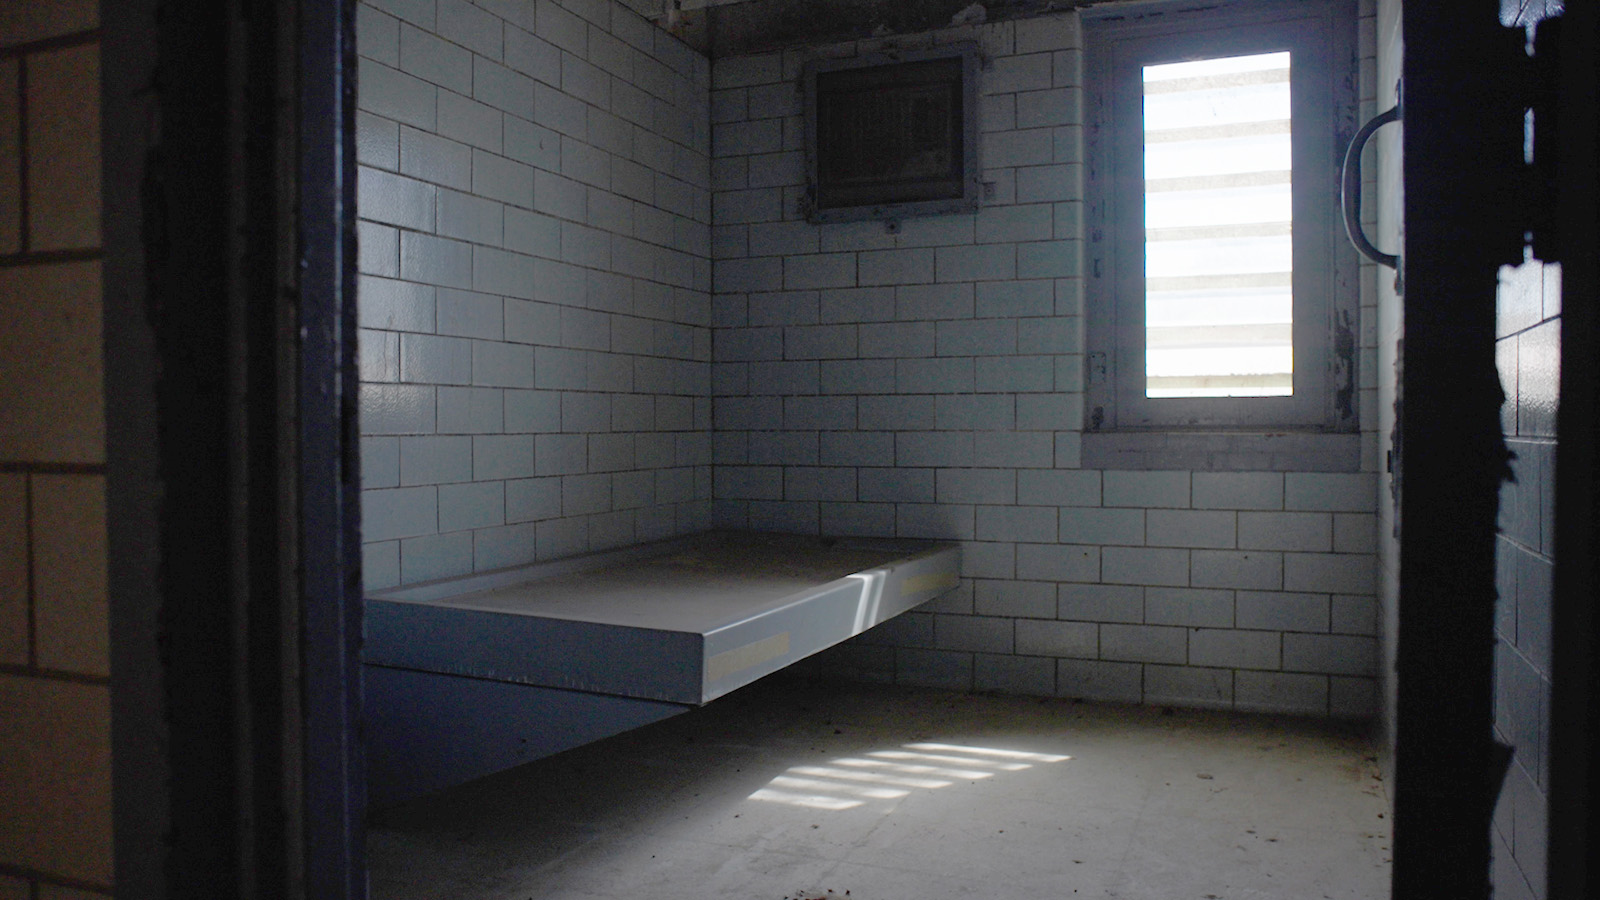 view of dark prison cell including bed platform and small window